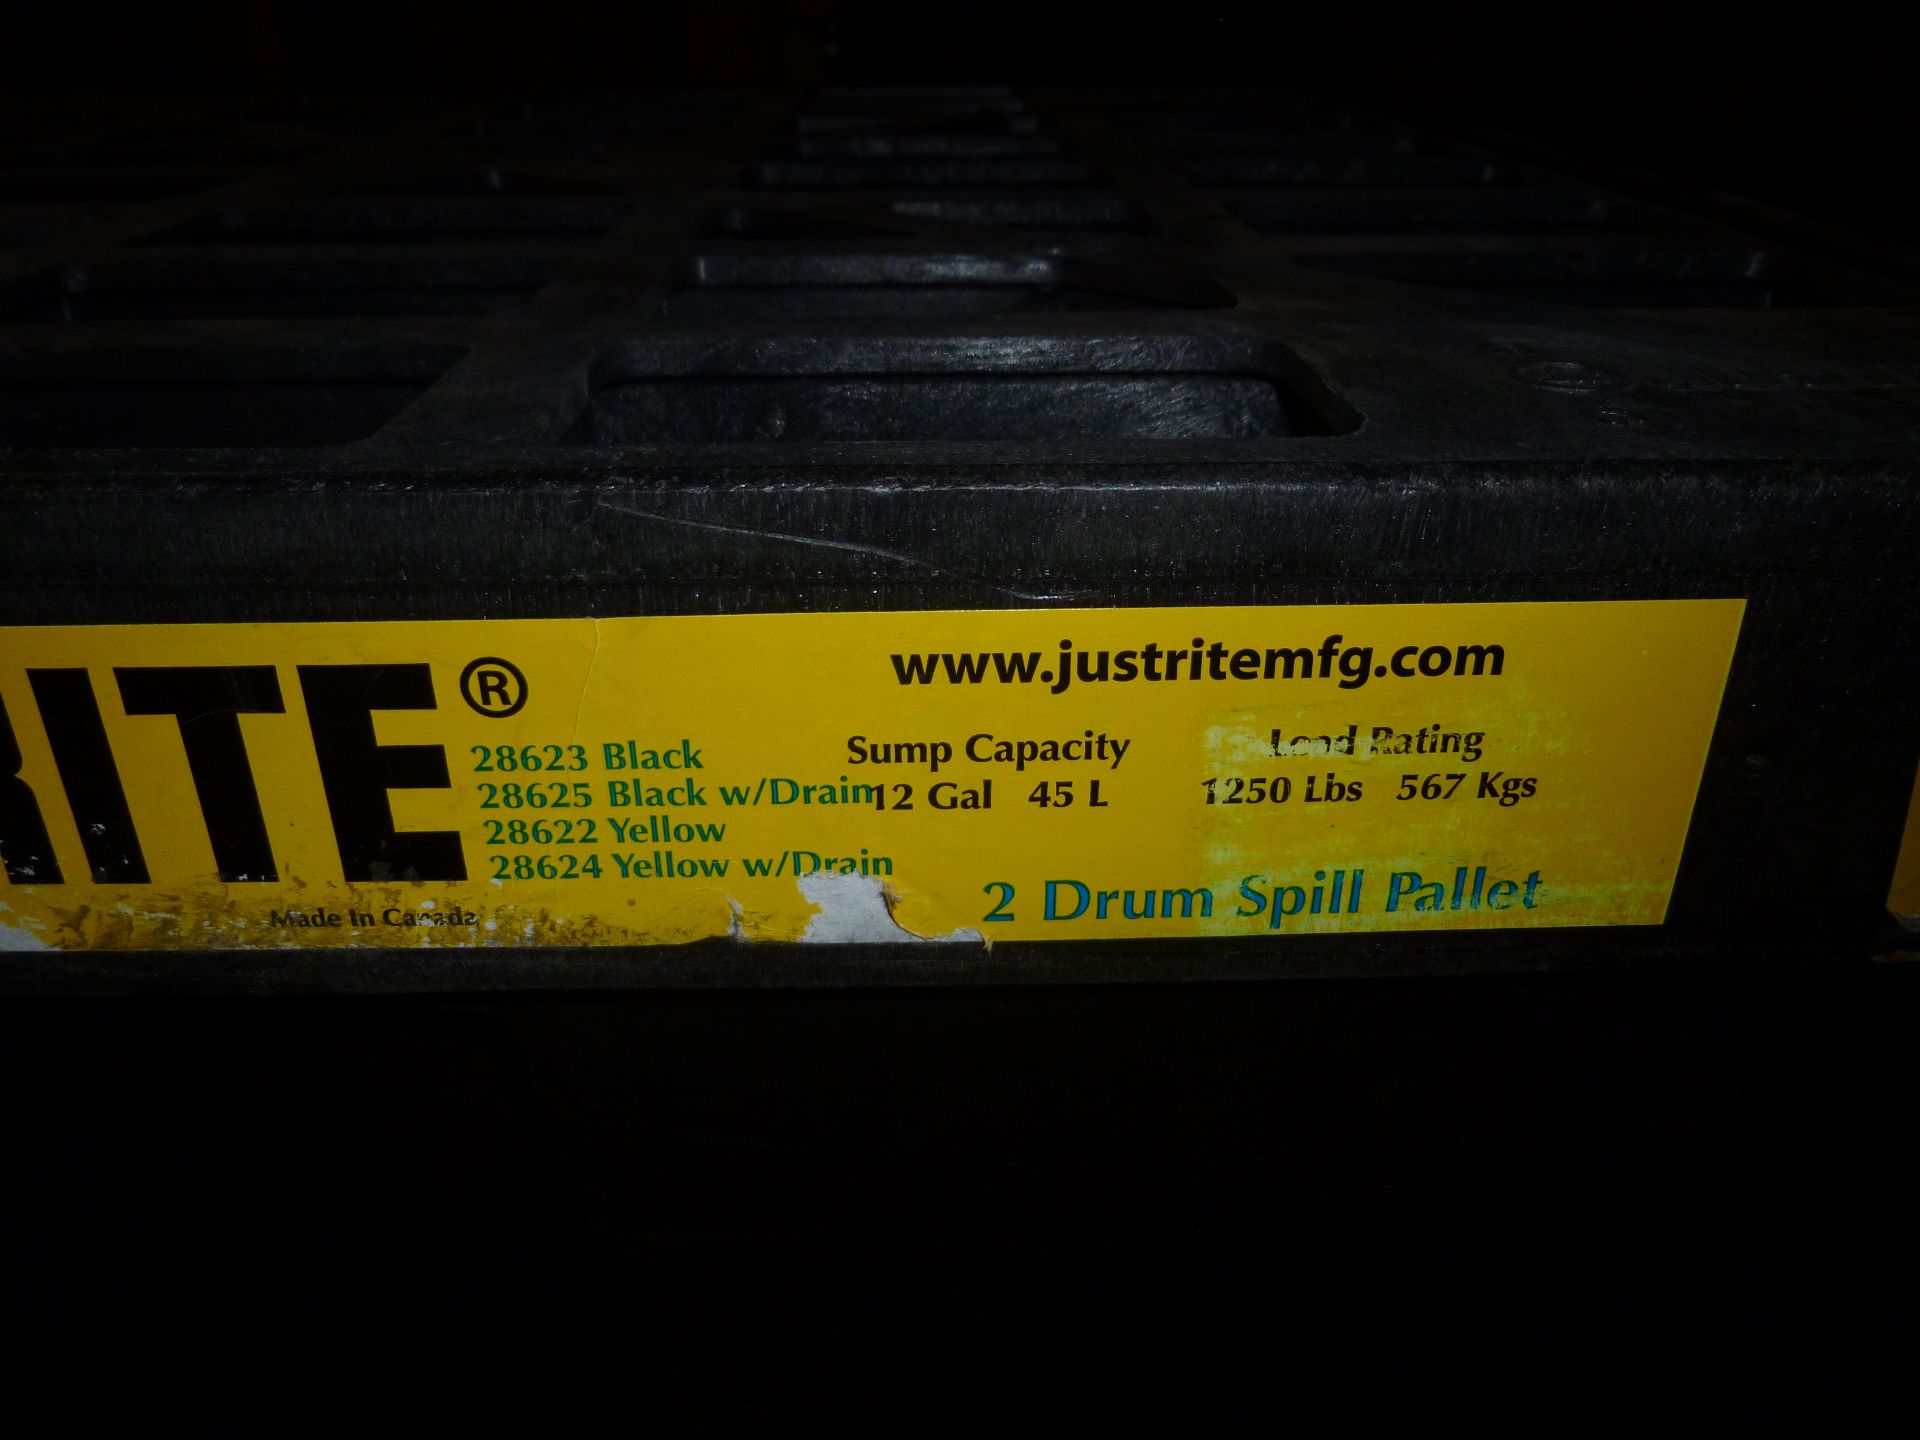 Justrite 2 drum spill pallet, sump capacity 12 gallon, 45 liter, load rating 1250lbs, new with - Image 2 of 3